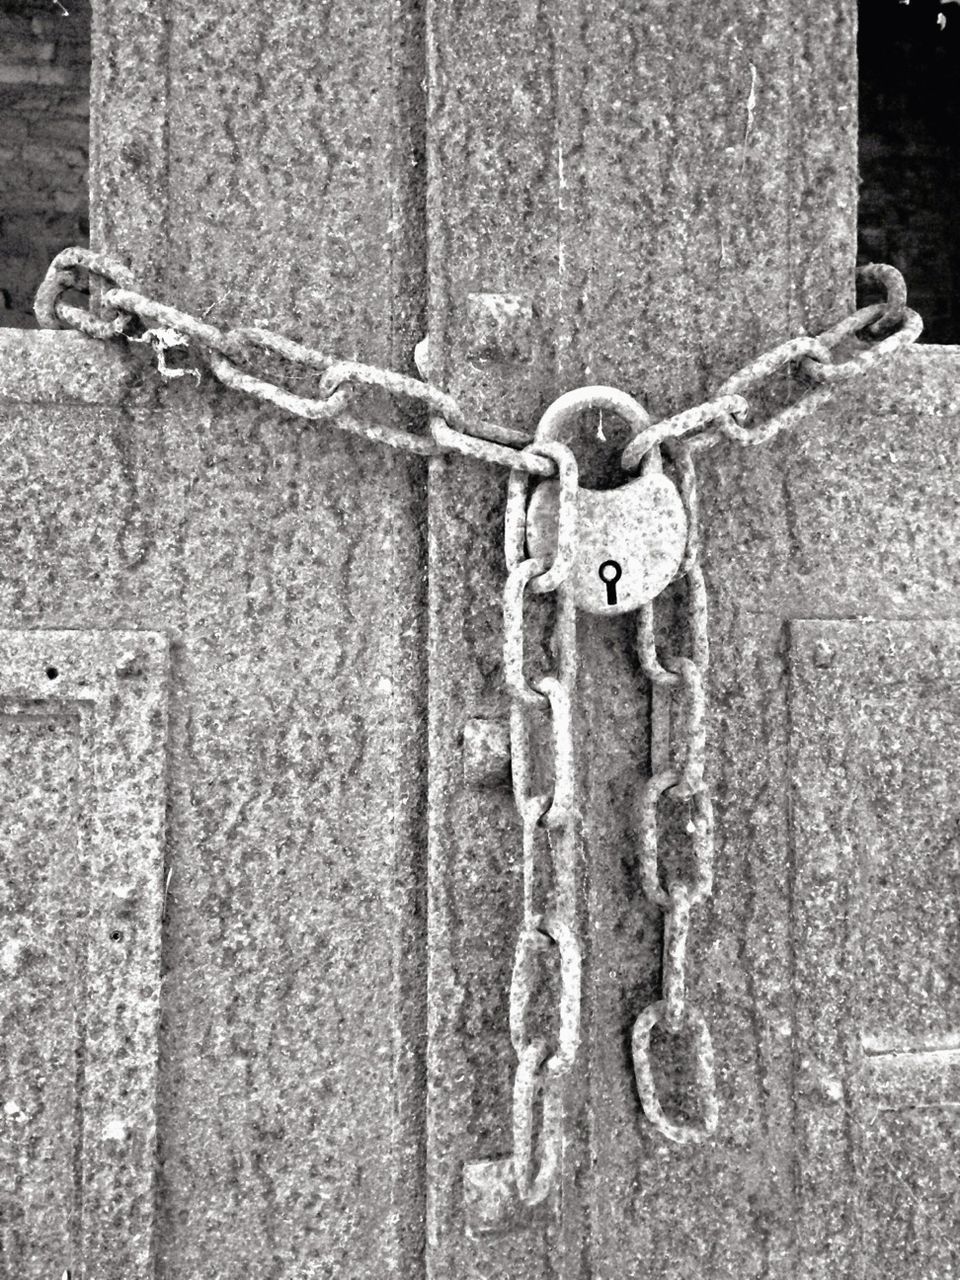 Close-up of rusty lock and chain tied up on door